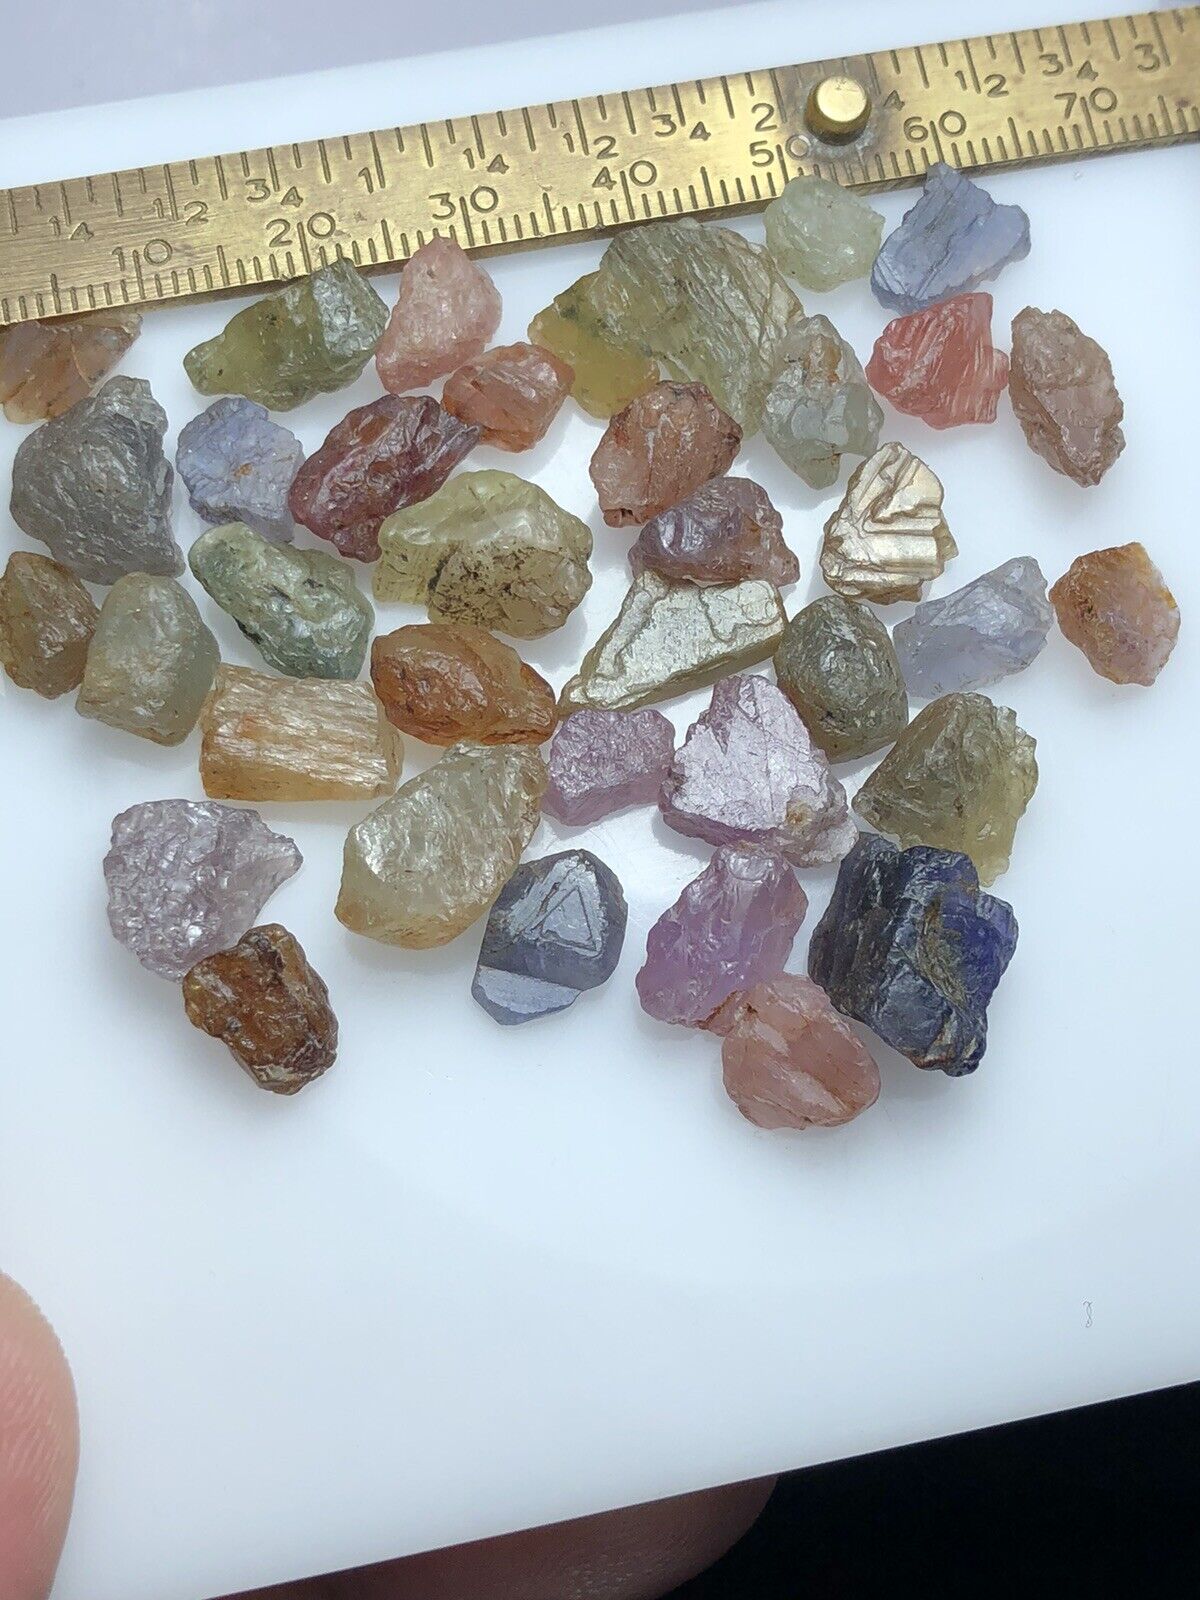 151 Crt / Natural Rough Multi Color Umba Sapphire From Africa, Hand Selection